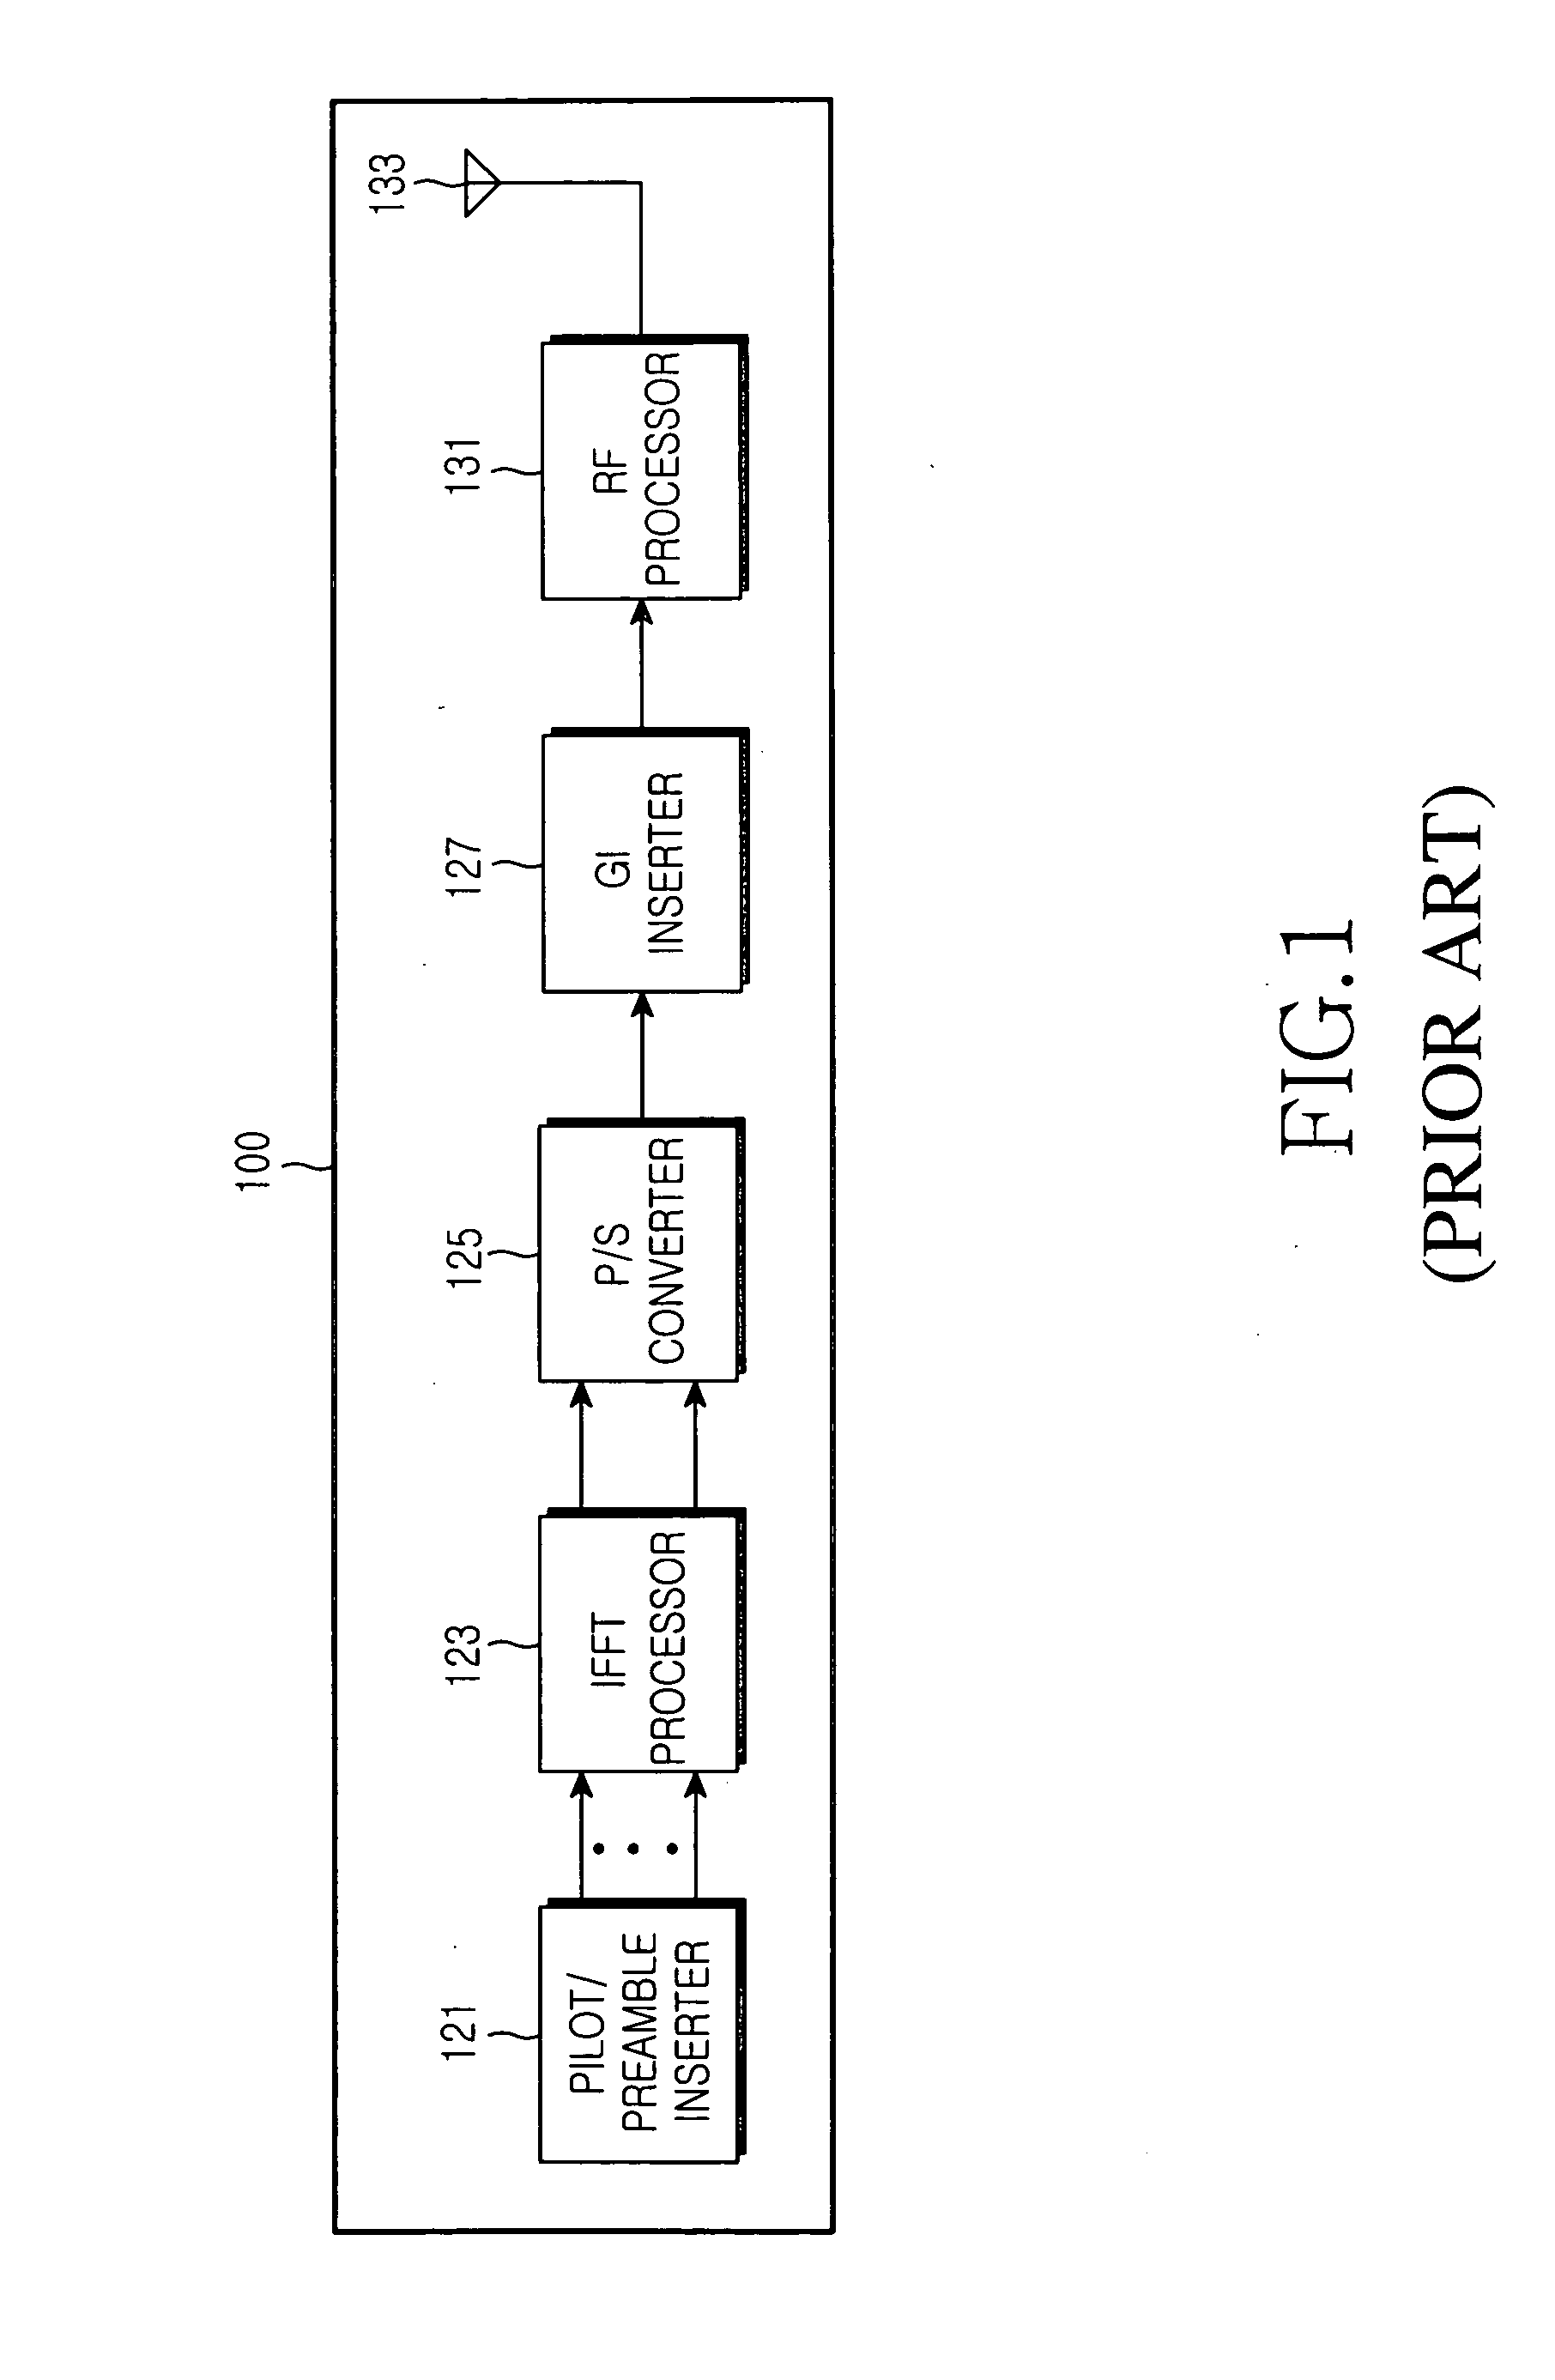 Apparatus and method for estimating interference and noise in a communication system